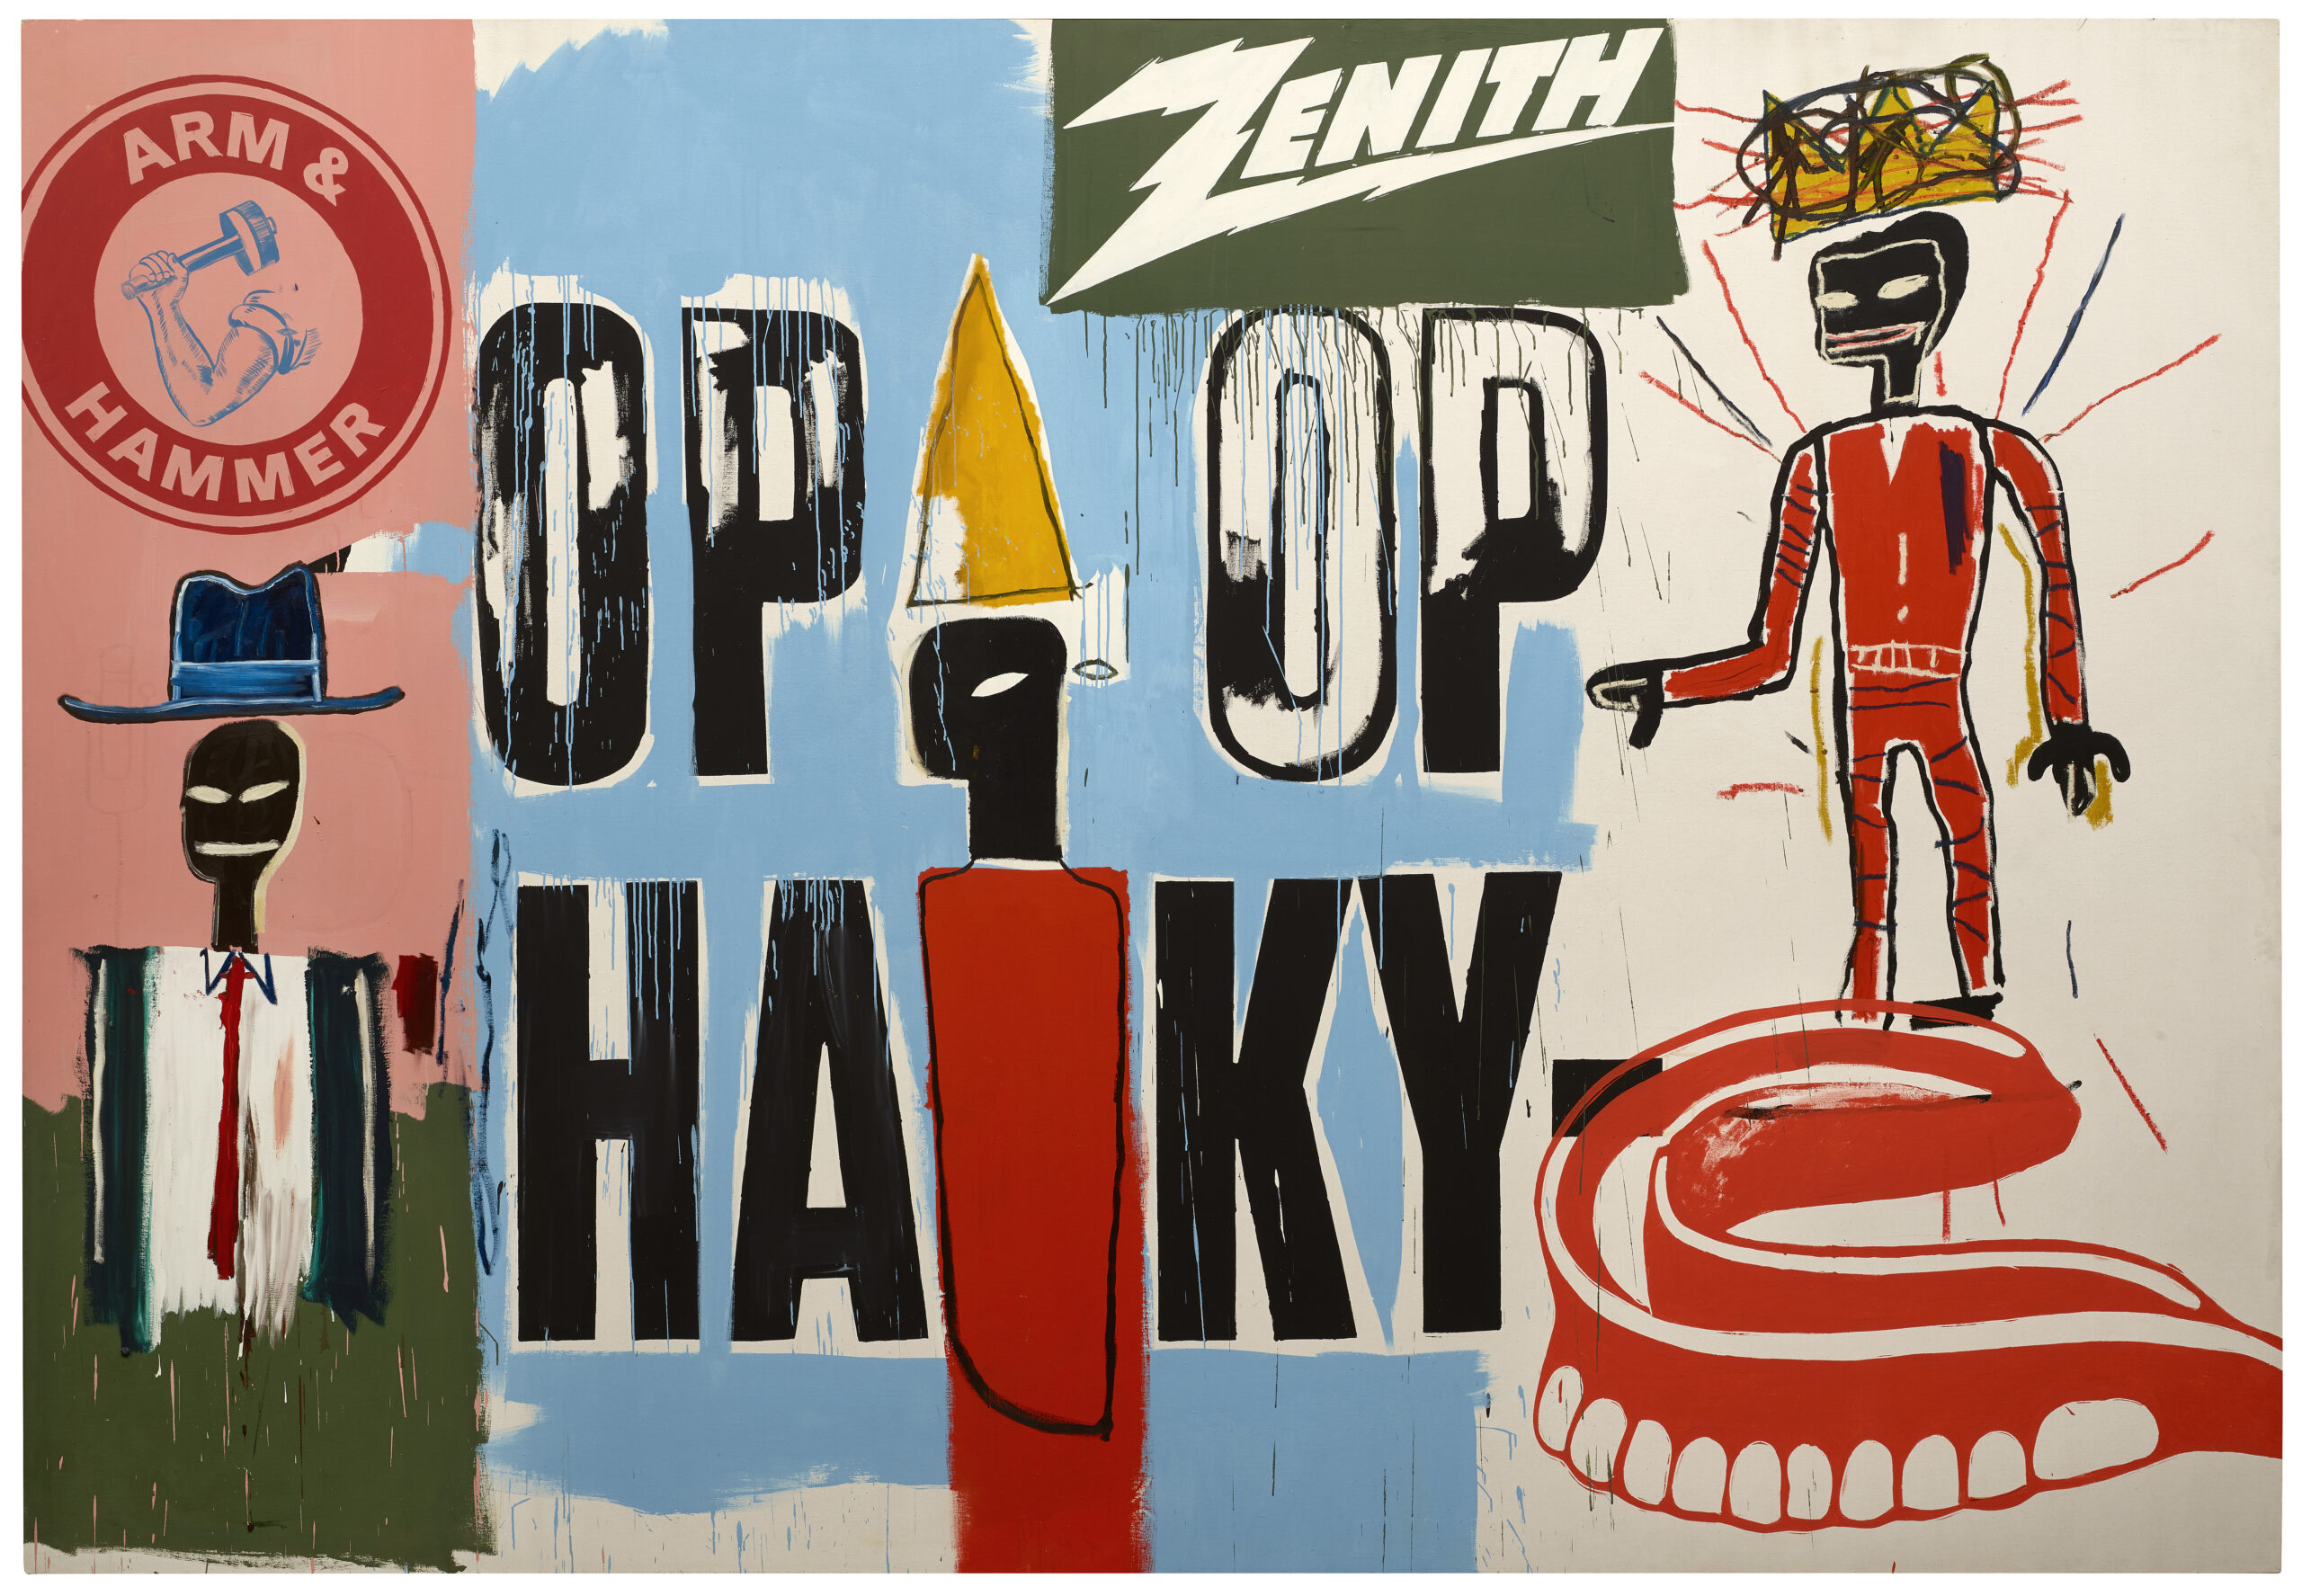 Jean-Michel Basquiat, Andy Warhol, OP OP, 1984-1985 Acrylique et bâton d’huile sur toile 287 × 417 cm Collection Bischofberger, Männedorf-Zurich, Suisse © The Estate of Jean-Michel Basquiat. Licensed by Artestar, New-York. © The Andy Warhol Foundation for the Visual Arts, Inc. / Licensed by ADAGP, Paris 2023